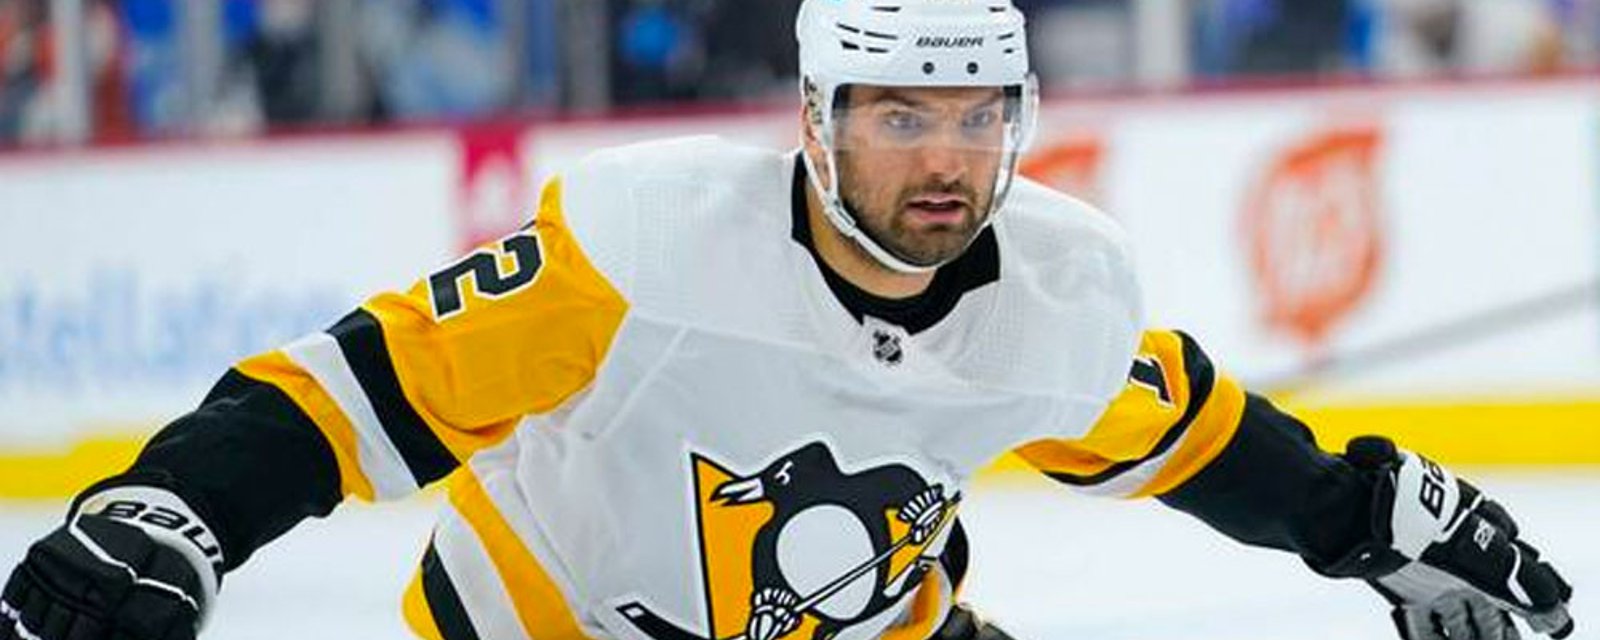 Penguins forward Aston-Reese tests positive for COVID-19